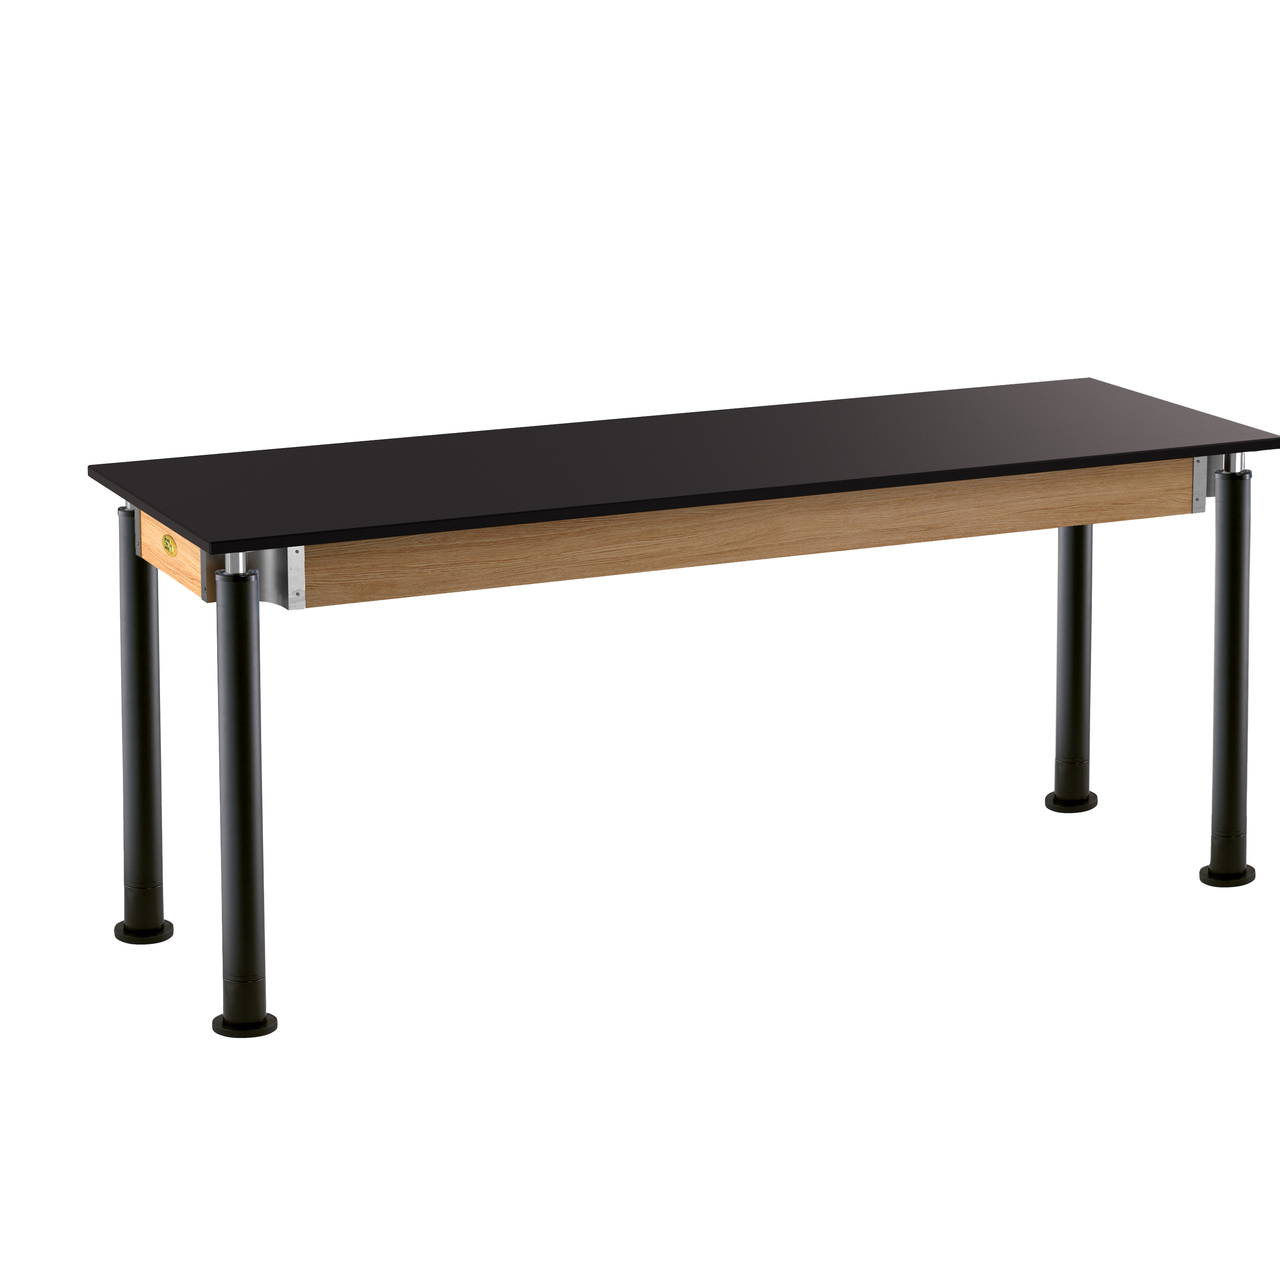 NPS Signature Science Lab Table, Black, 24"x72", Chemical Resistant Top - Black Top and Black Leg